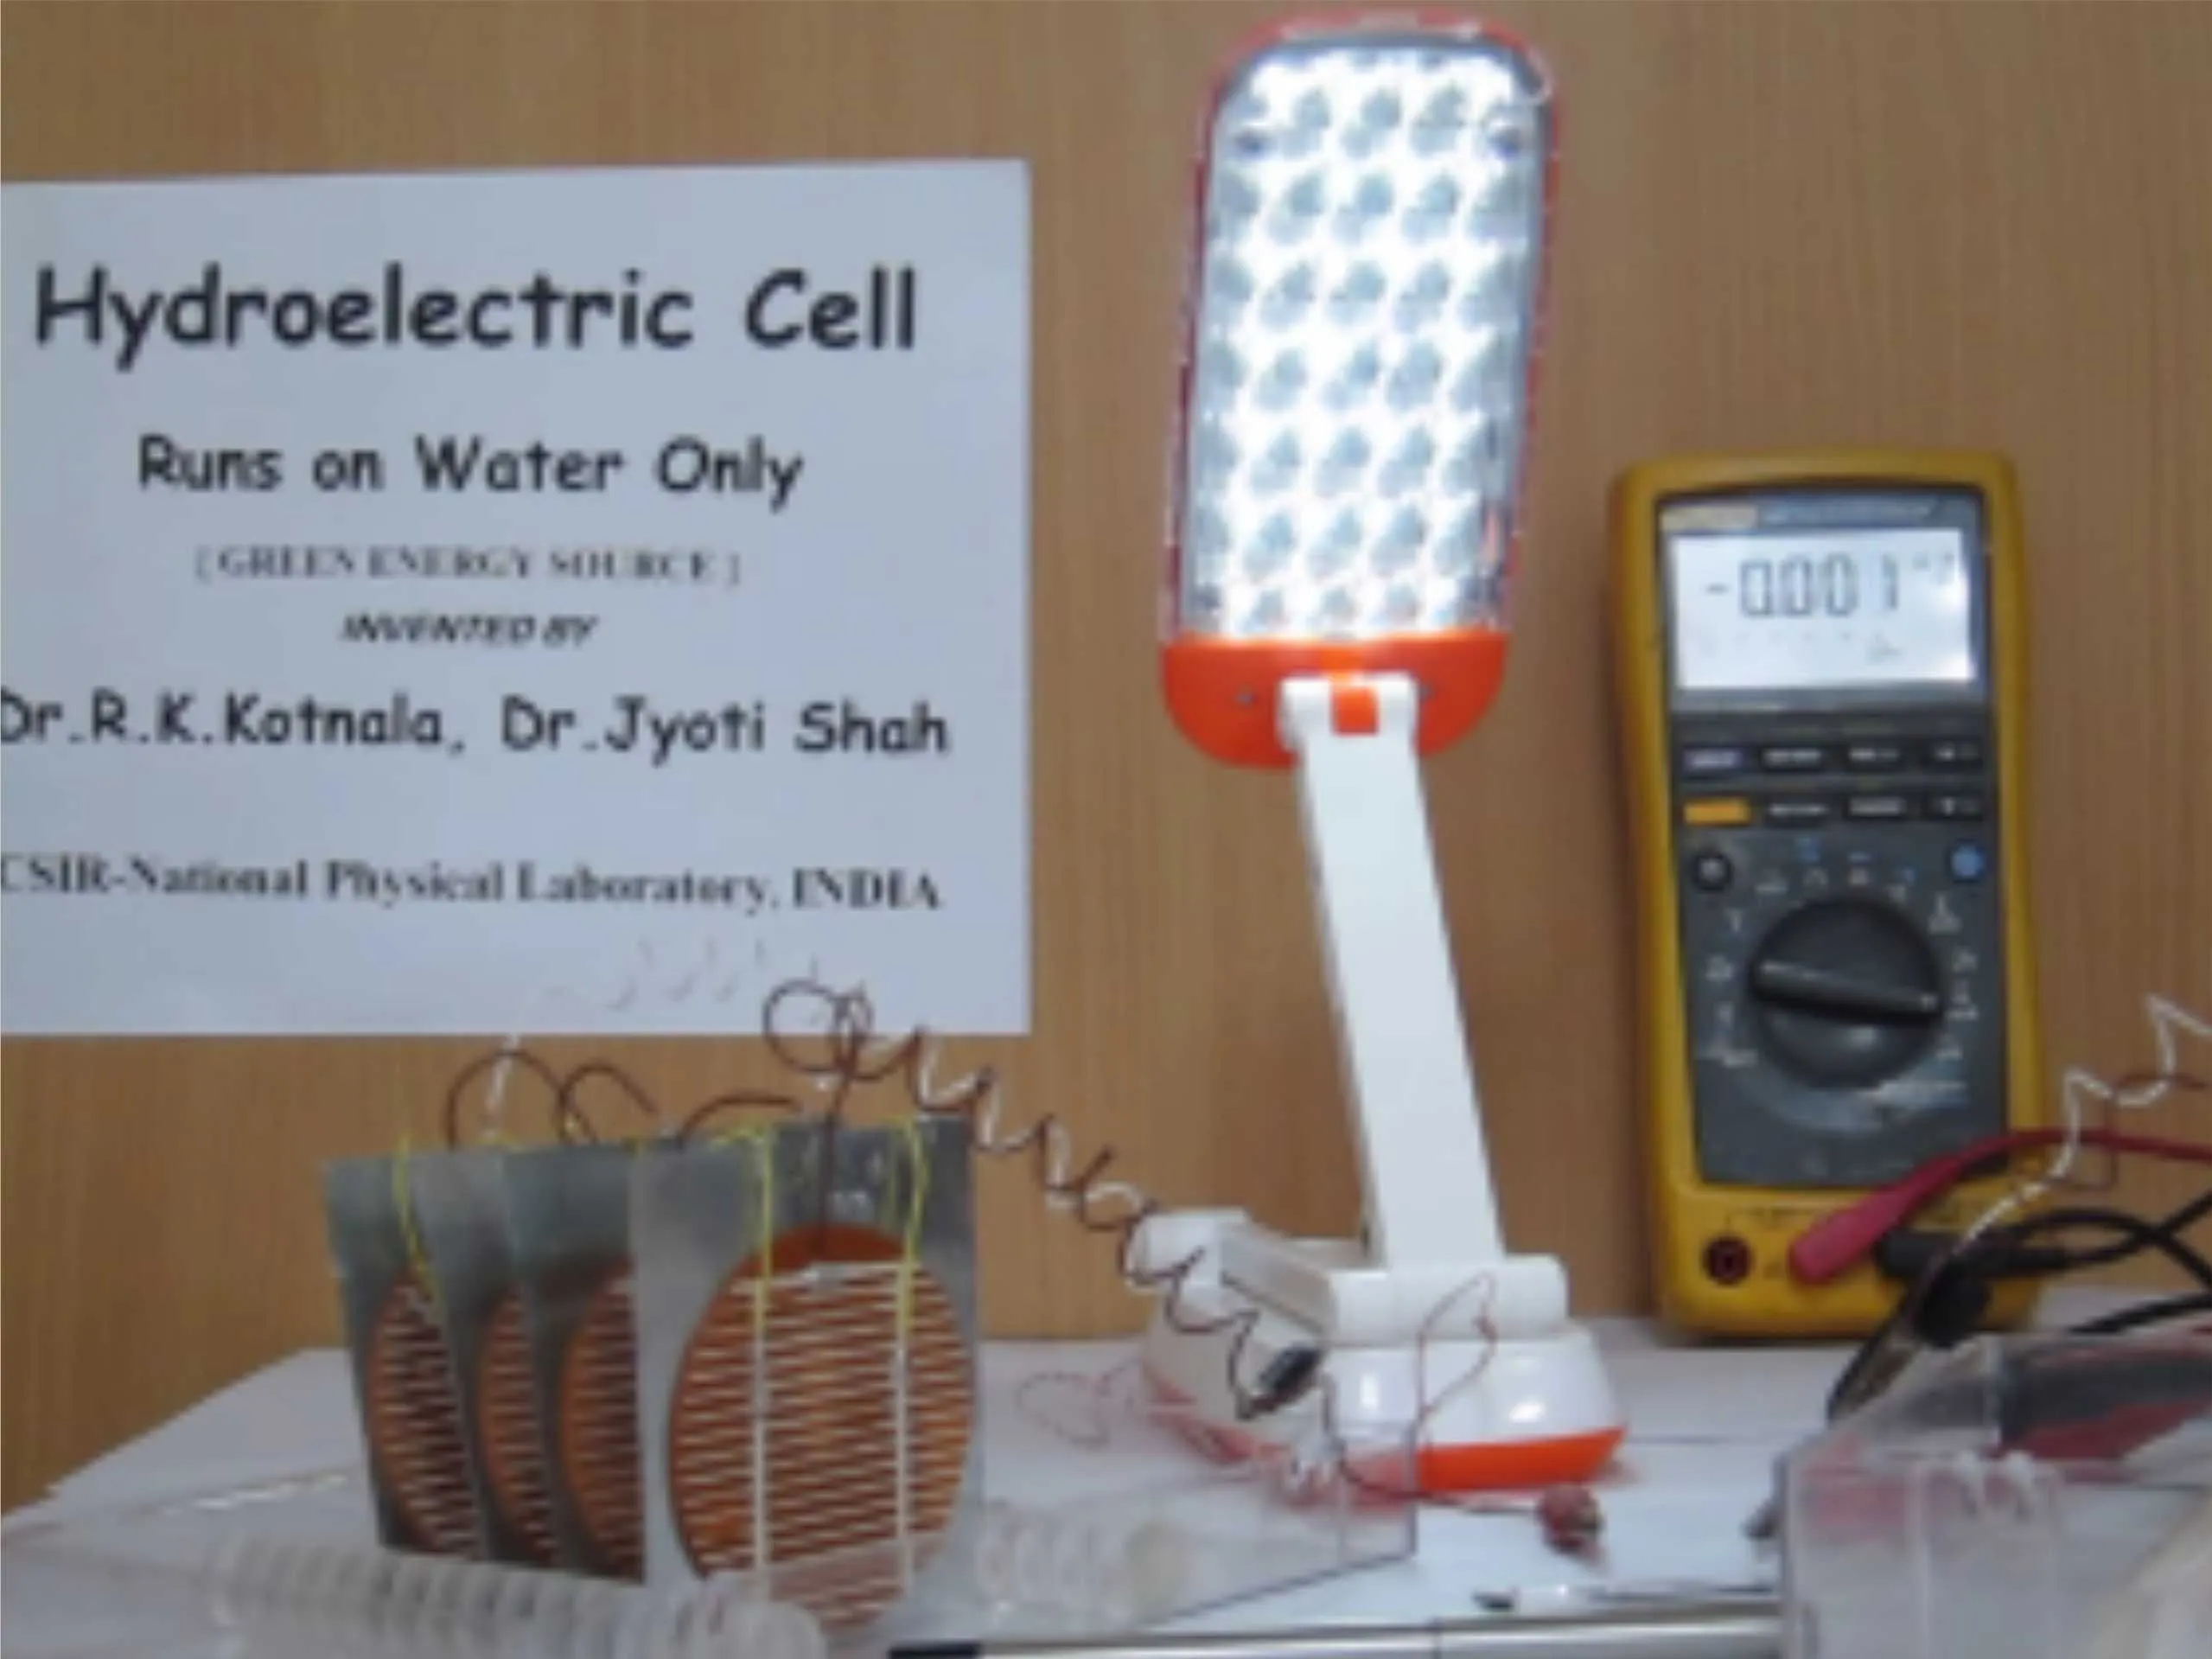 Hydroelectric cell